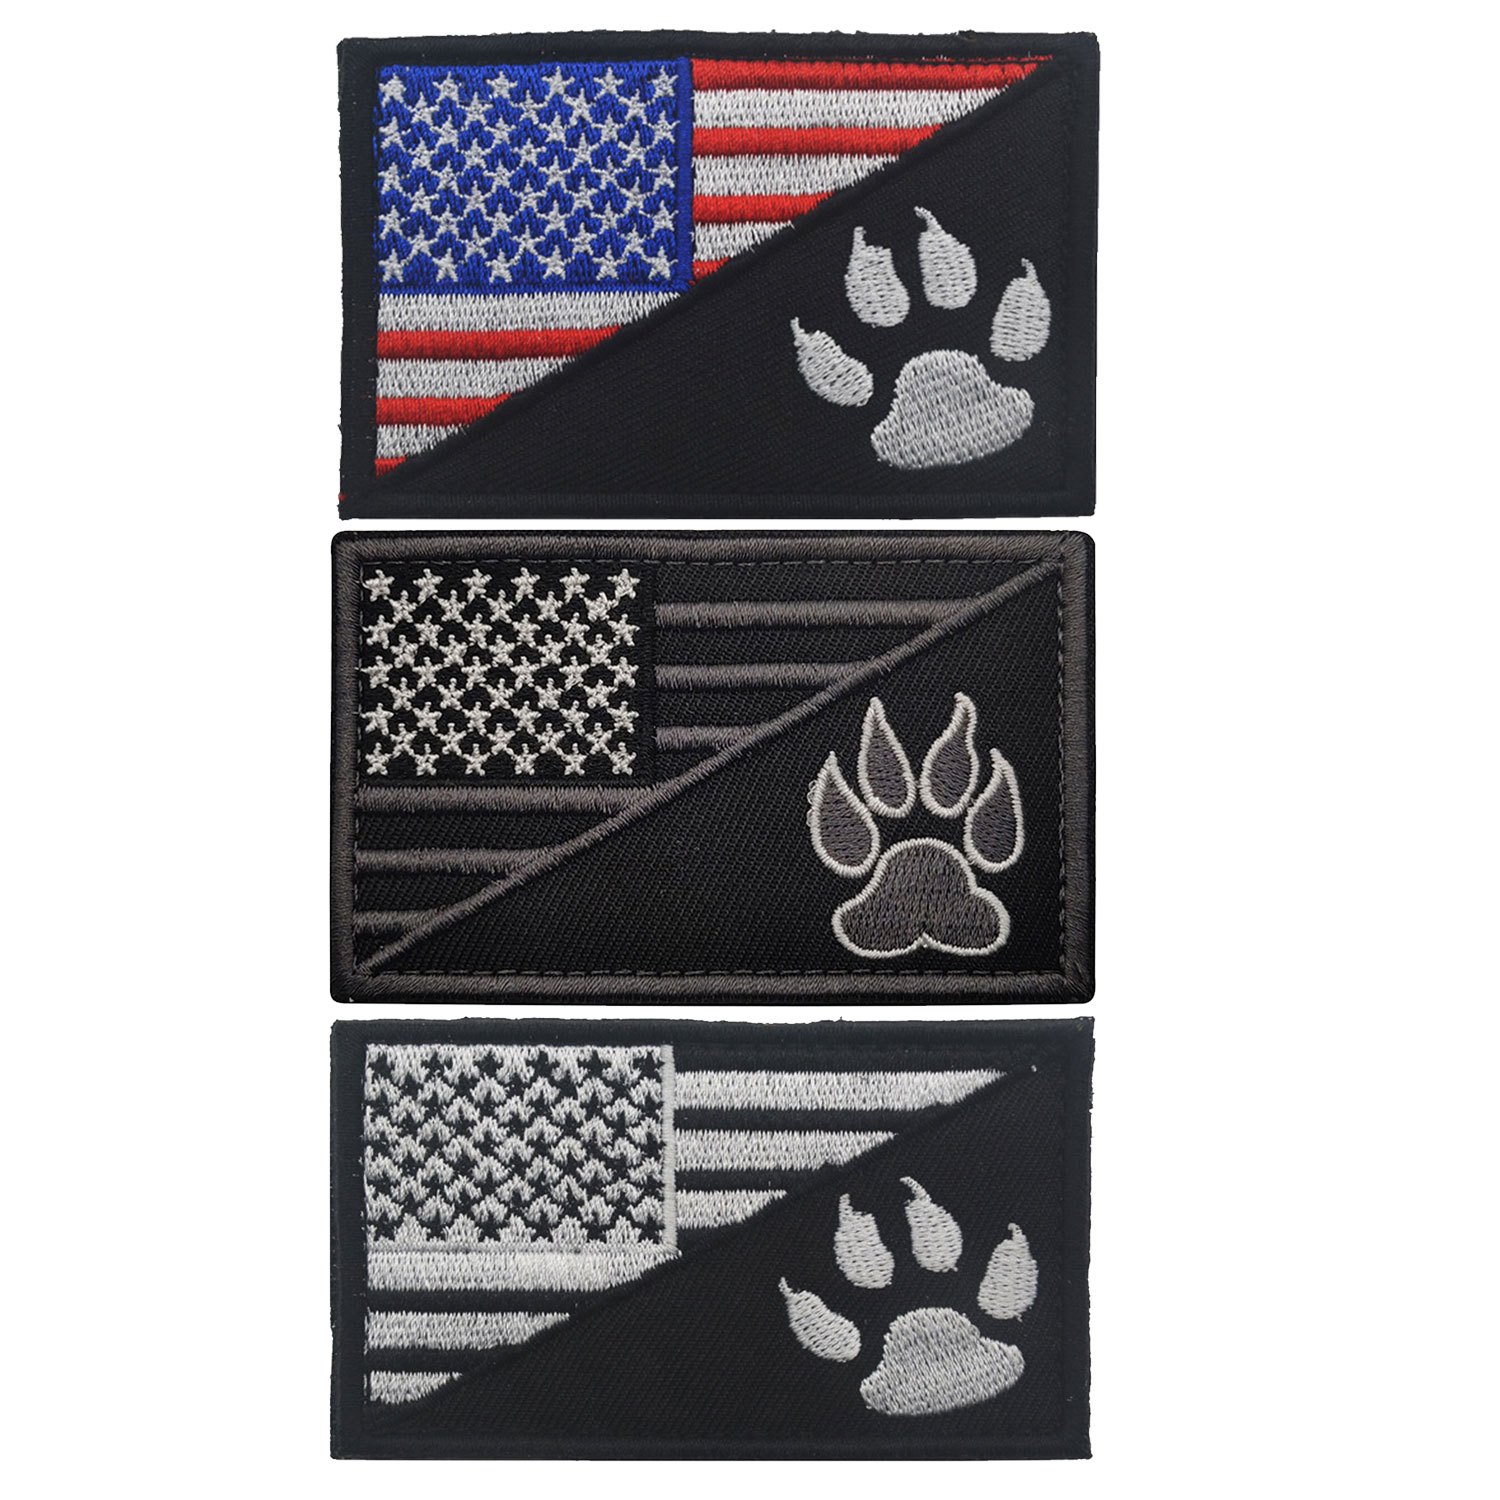 20pcs Embroidery Tactical Patch Set, Funny Military Hook And Loop Patch For  Caps, Backpacks, Clothes, Vest, Military Uniforms, Tactical Gears Etc